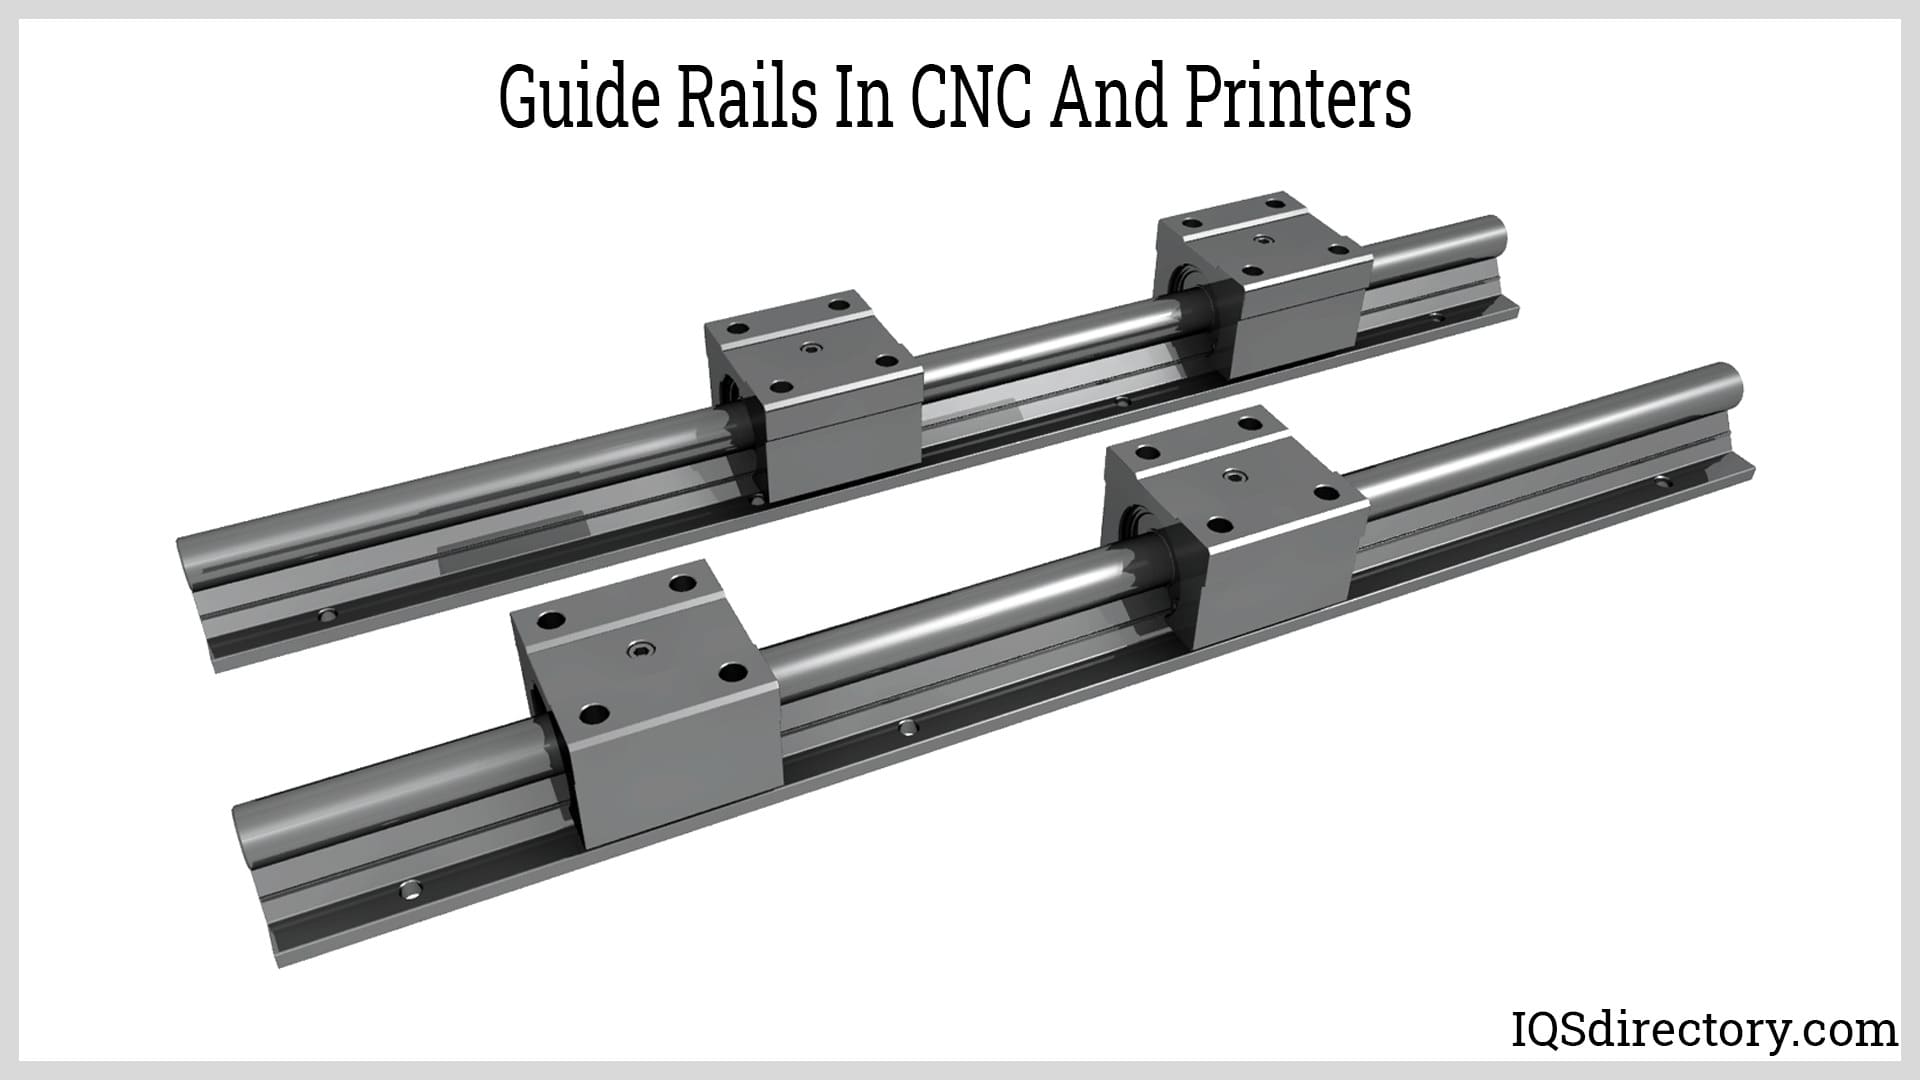 Guide rails in CNC and Printers